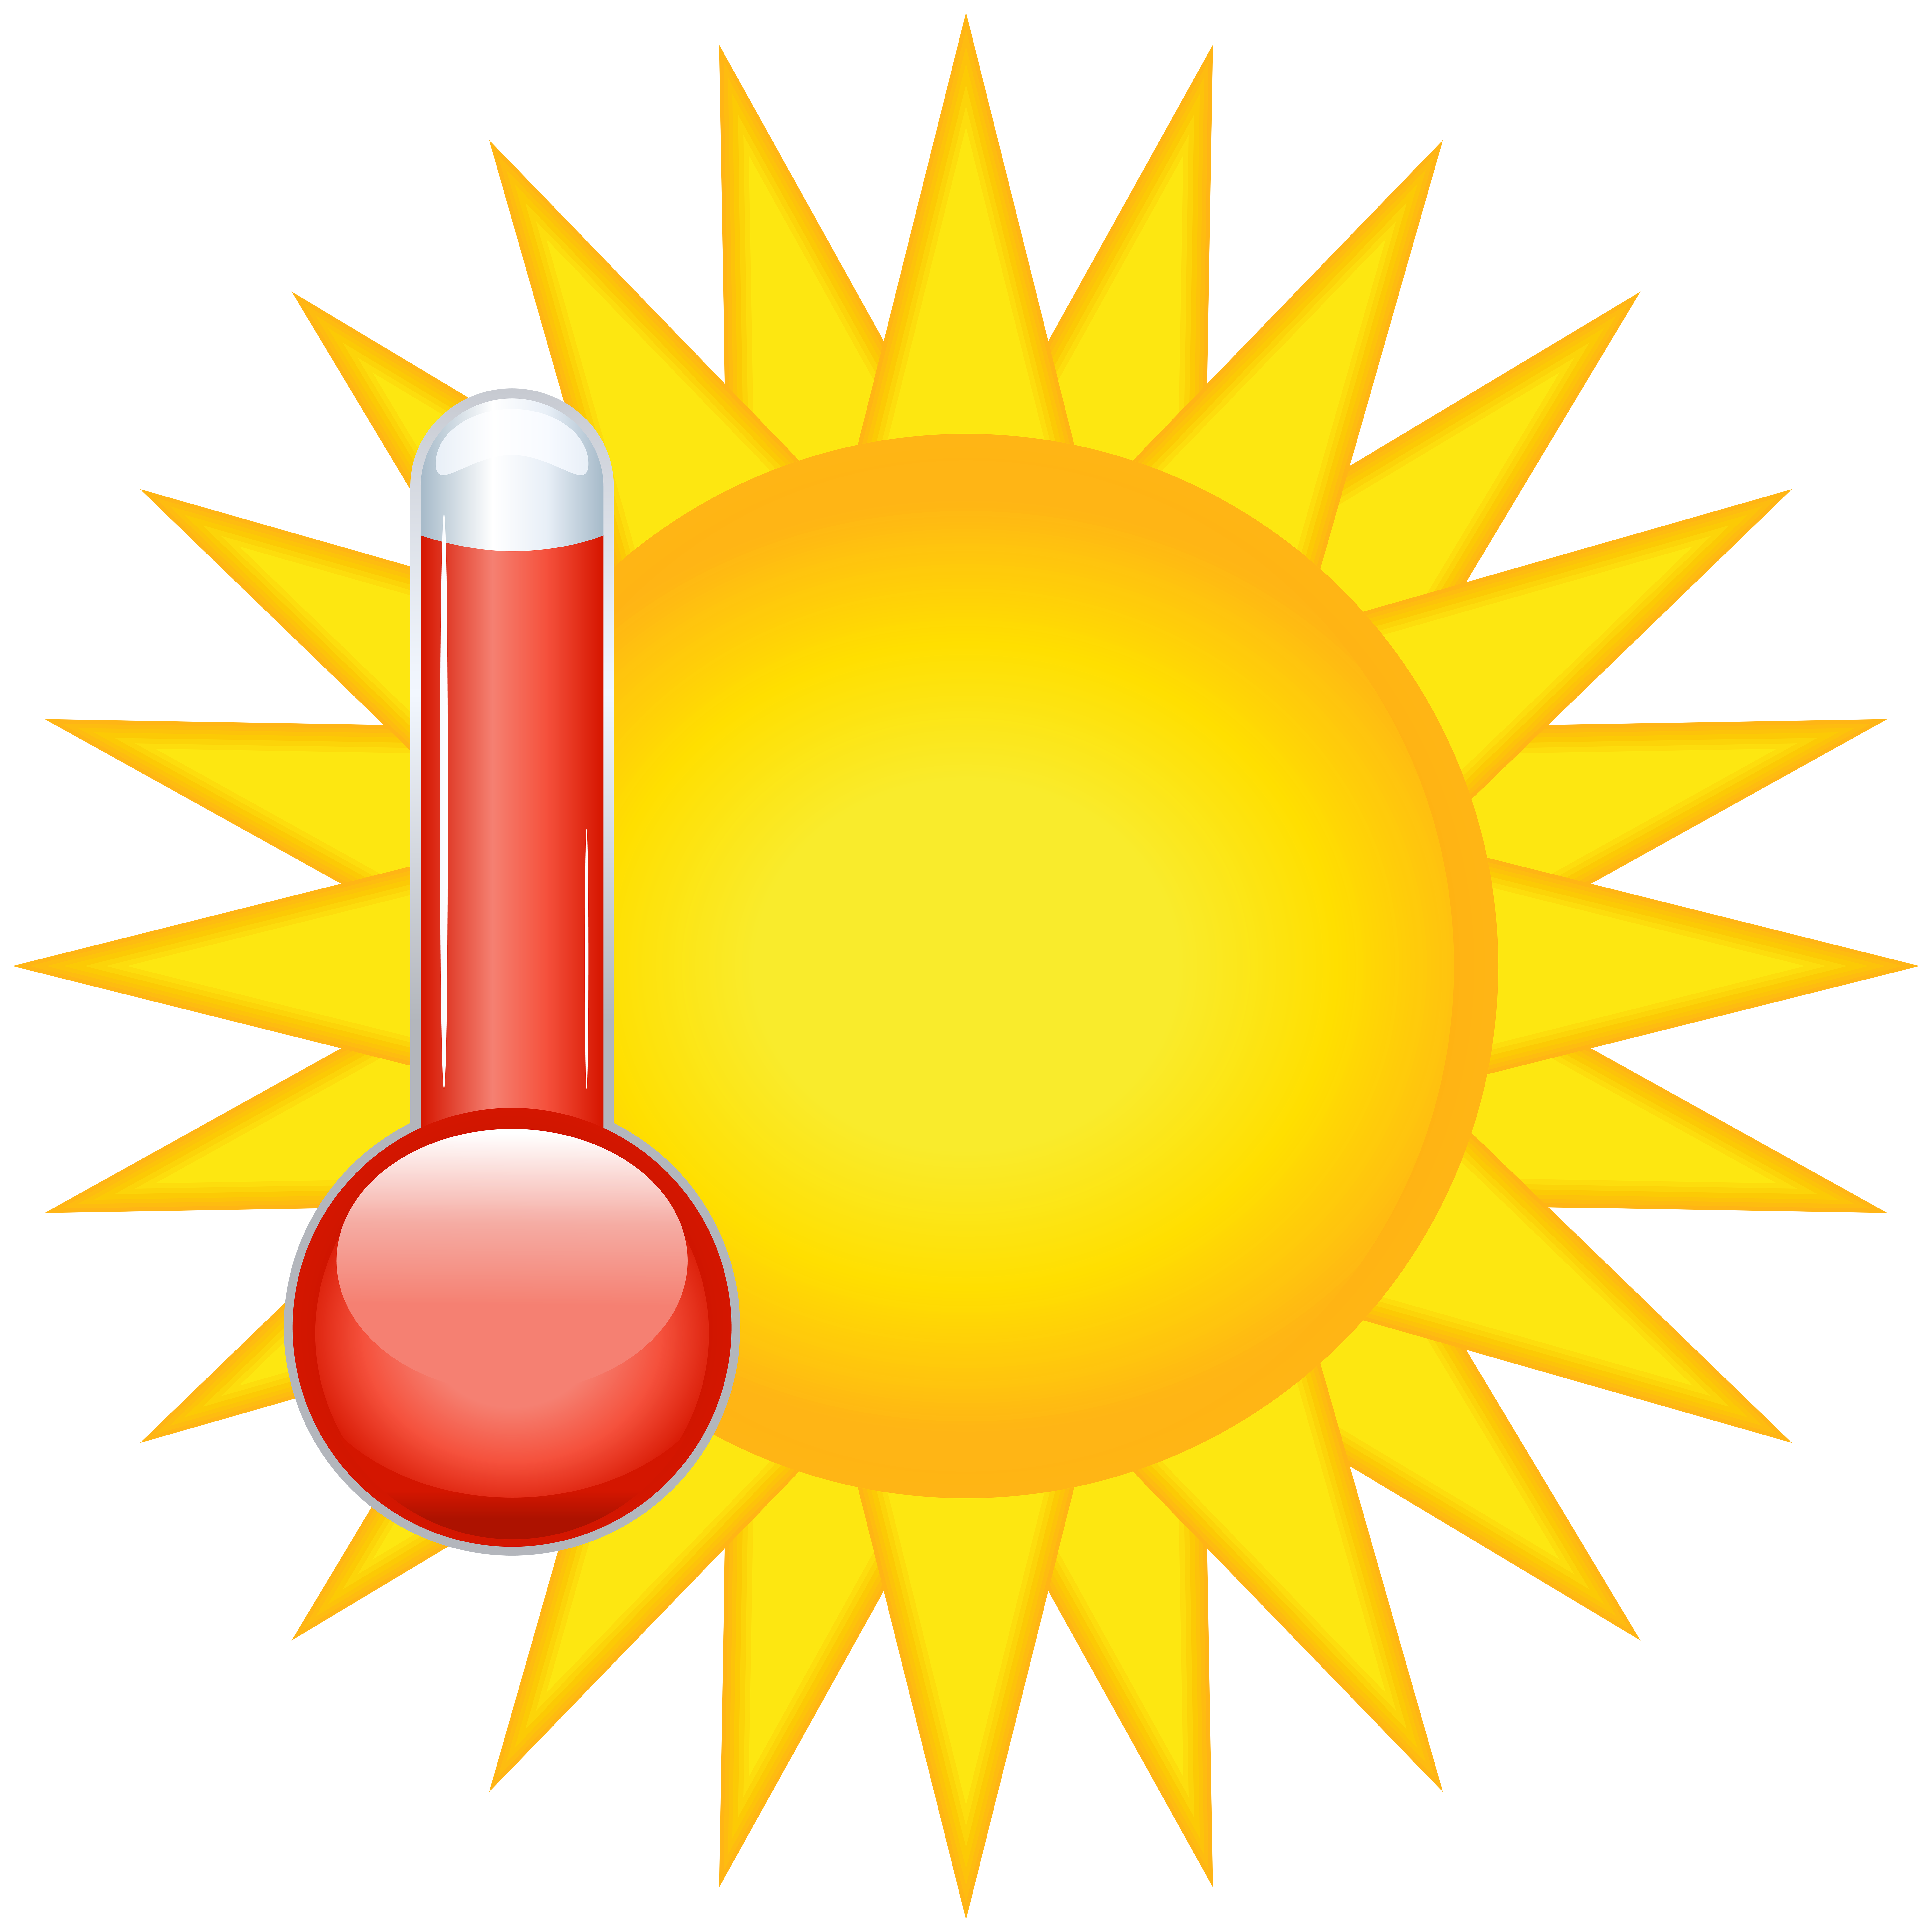 Clip Arts Related To : hot weather clipart. view all hot-weather-cl...